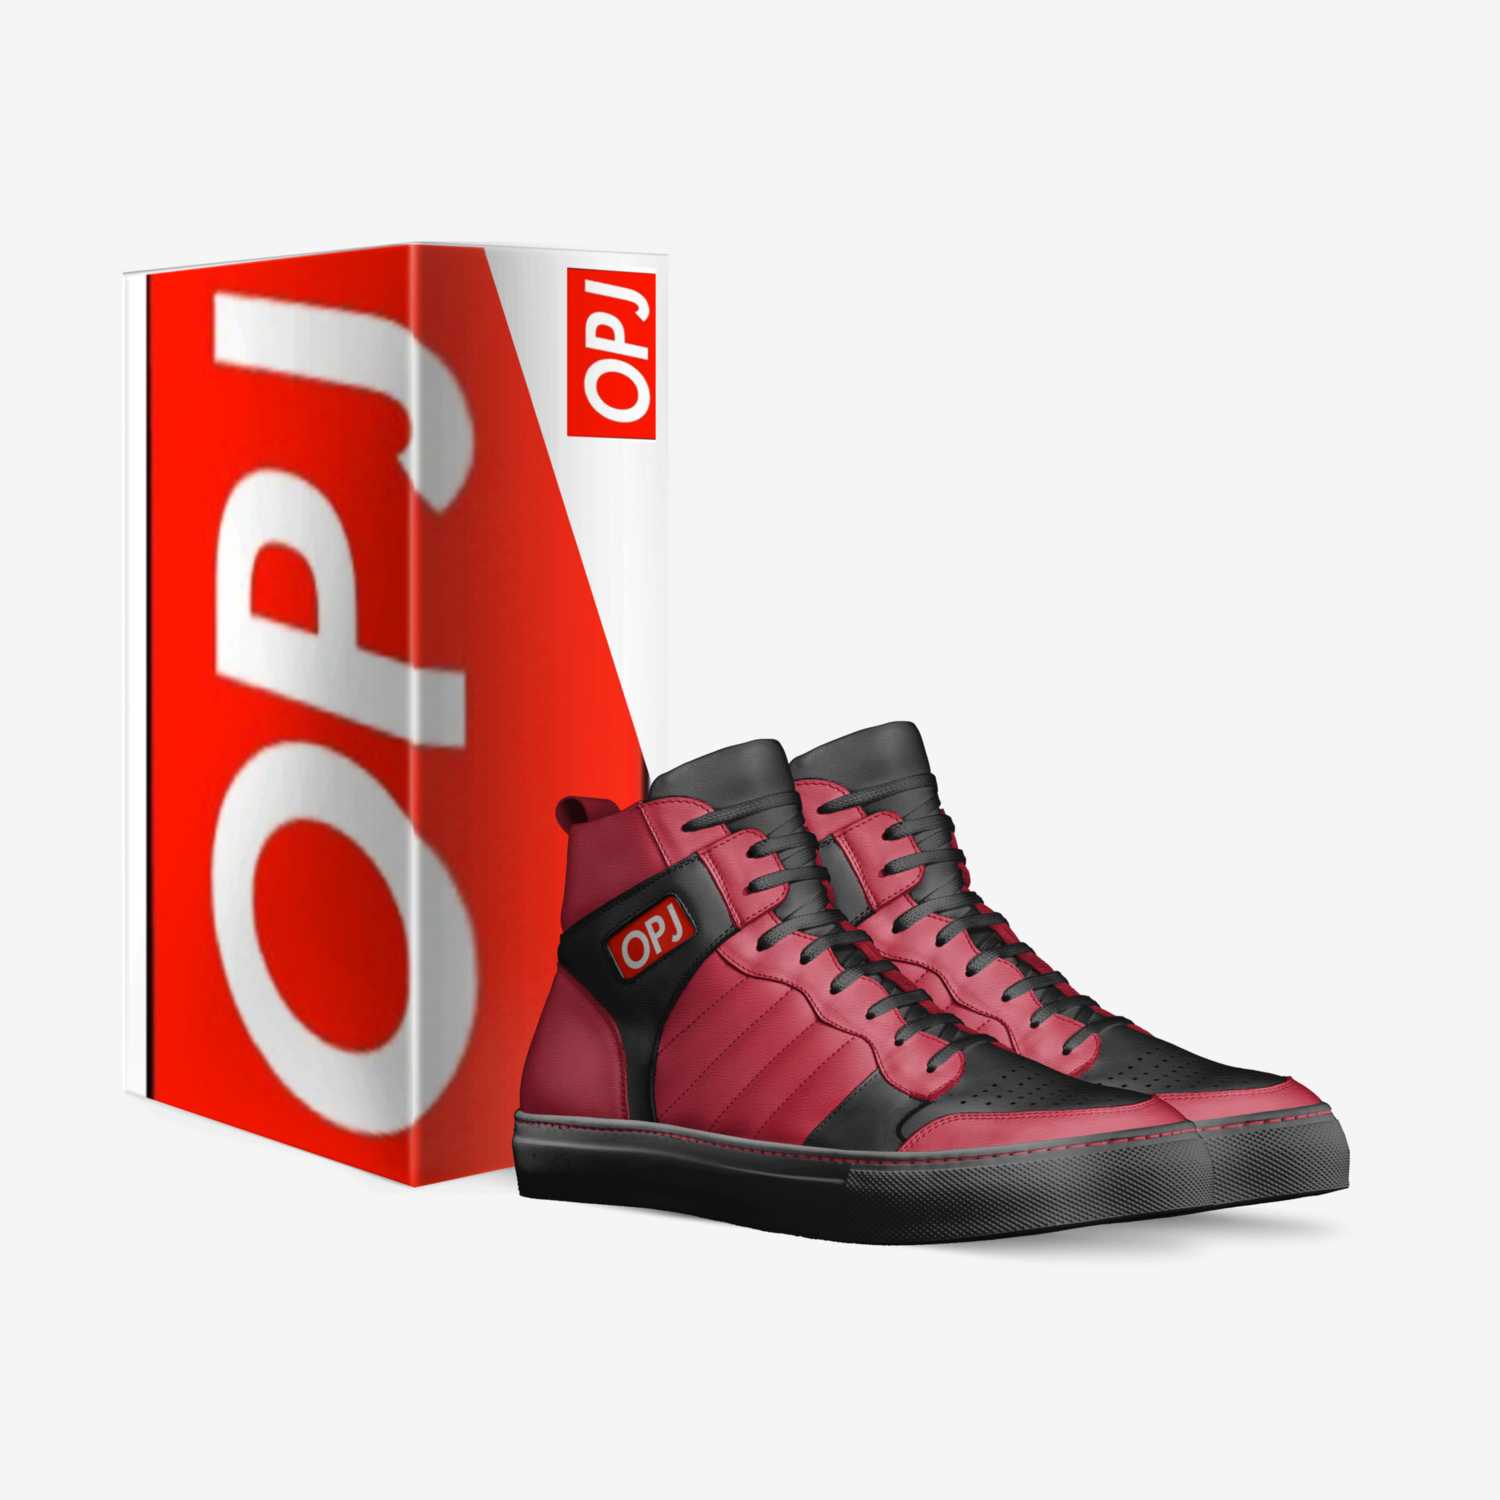 OPJs custom made in Italy shoes by Owen | Box view